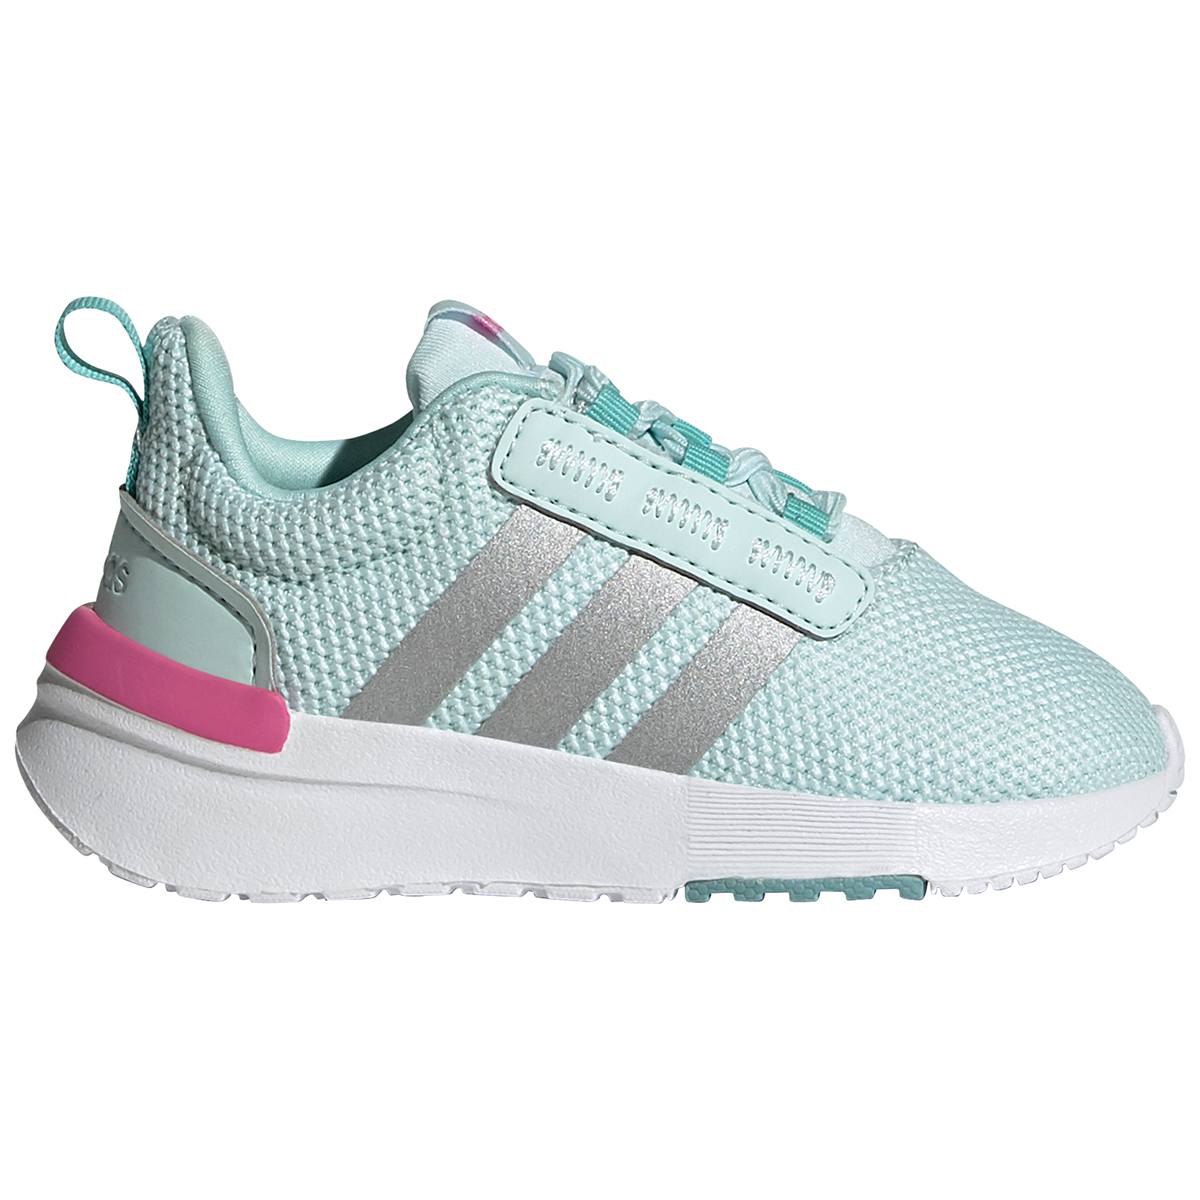 Adidas Infant Girls' Racer Tr21 Shoes